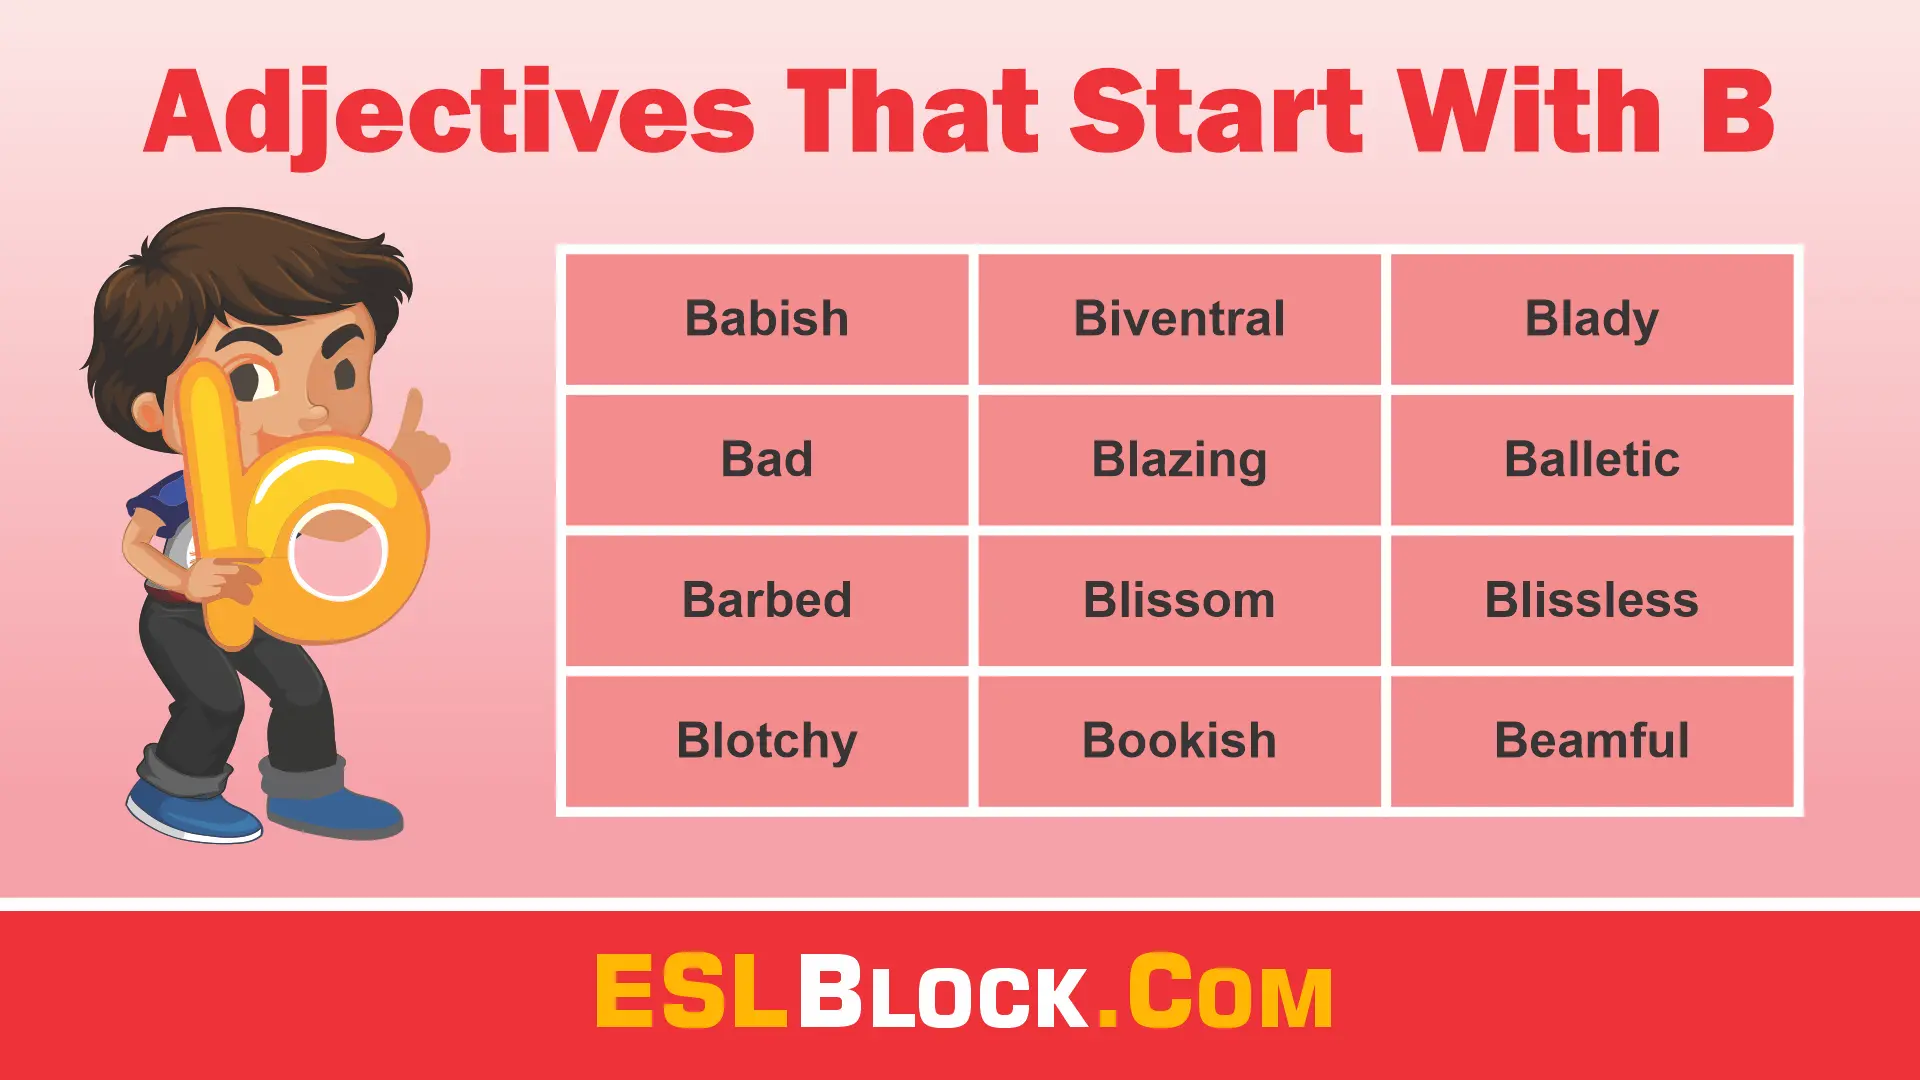 Adjectives that start with B, A-Z Adjectives, Adjective Words, Adjectives, B Words, Vocabulary, Words That Describe a Person